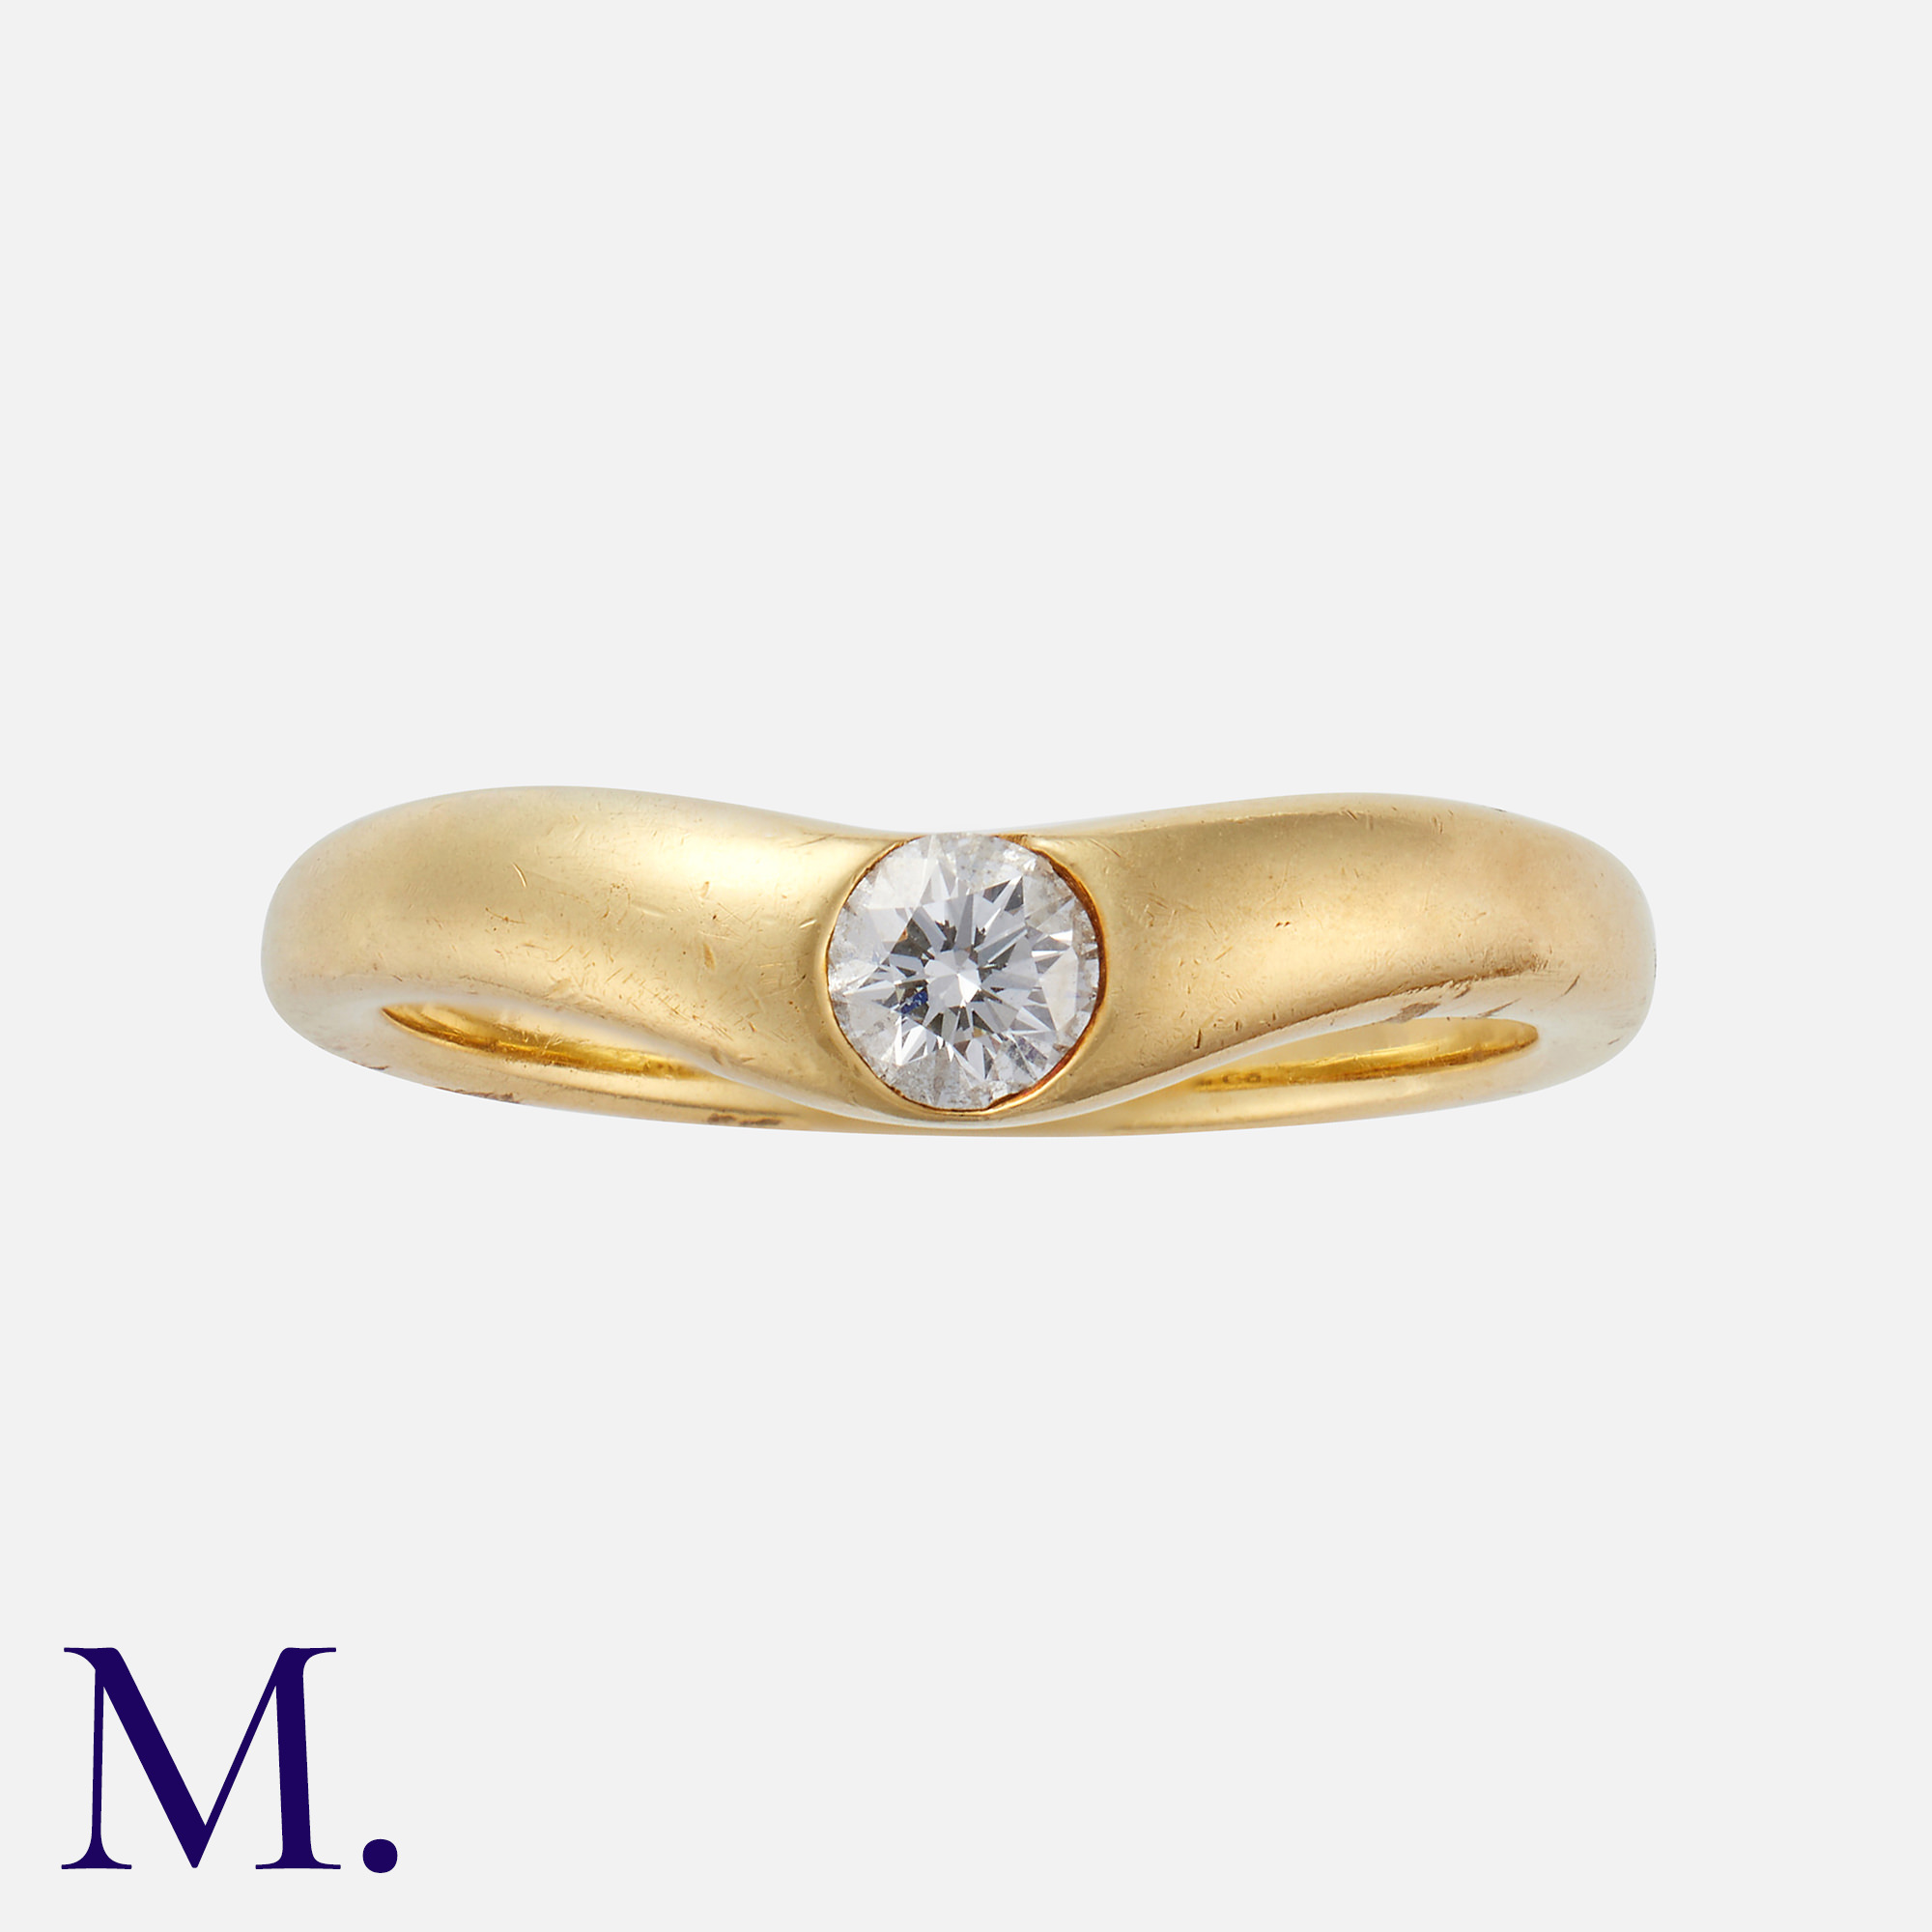 TIFFANY & CO. A Diamond Ring in 18K yellow gold, flush set with a brilliant cut diamond weighing